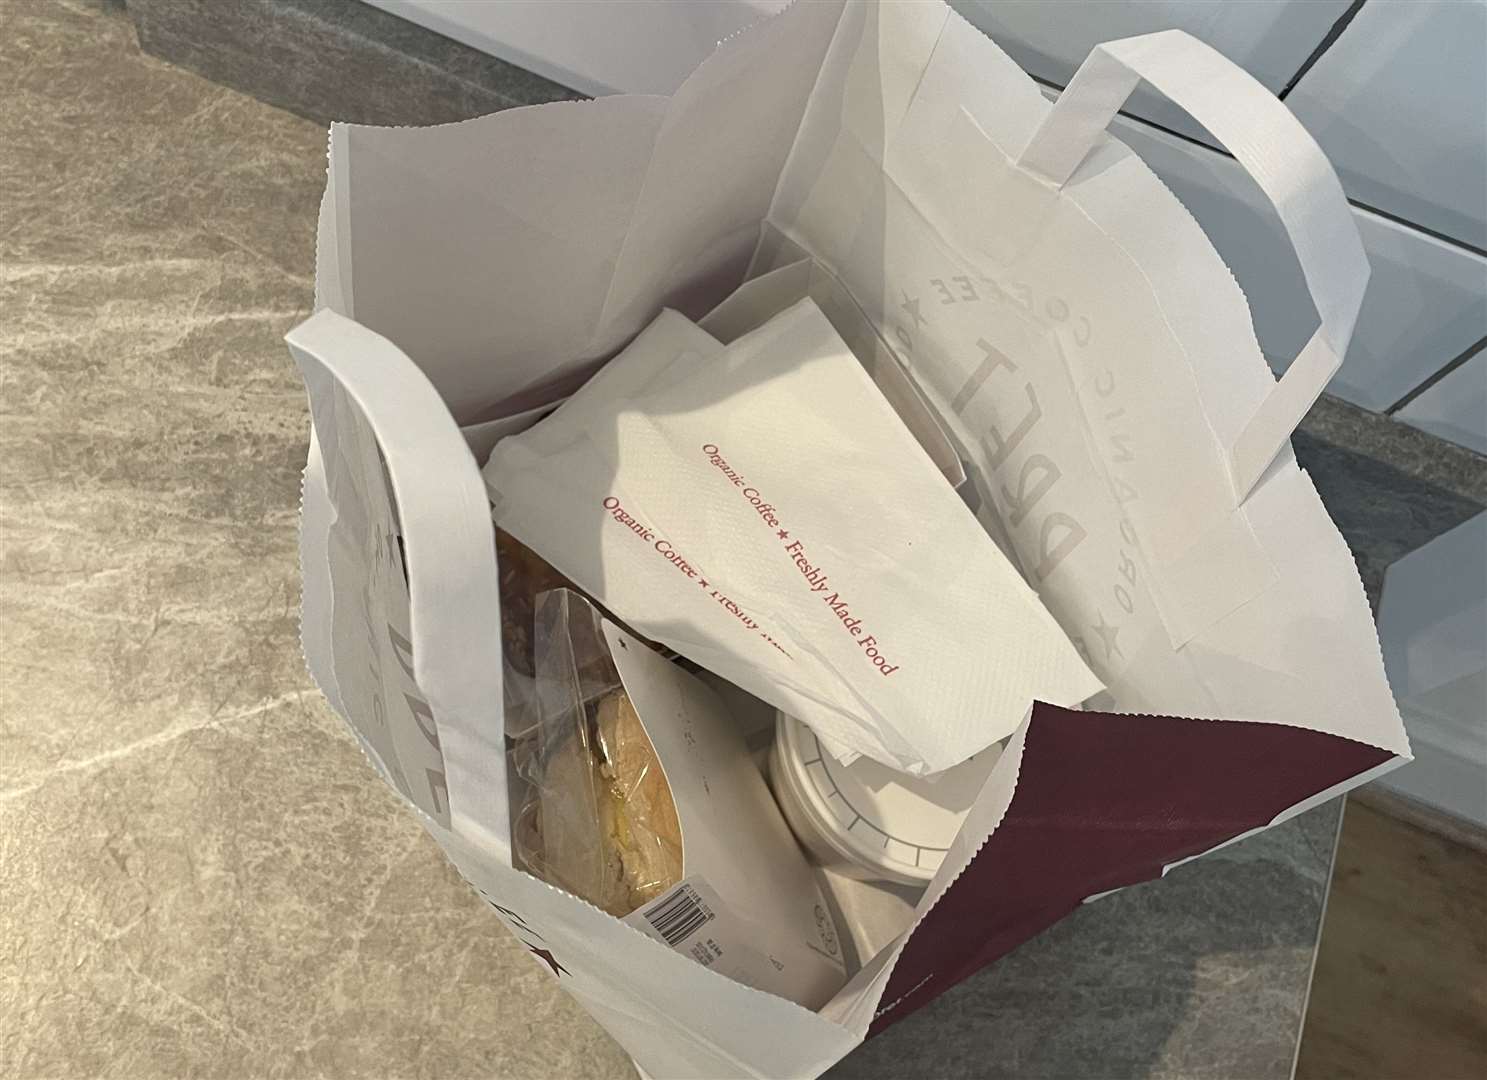 Inside Pret a Manger's £3 breakfast bag from the Too Good To Go app